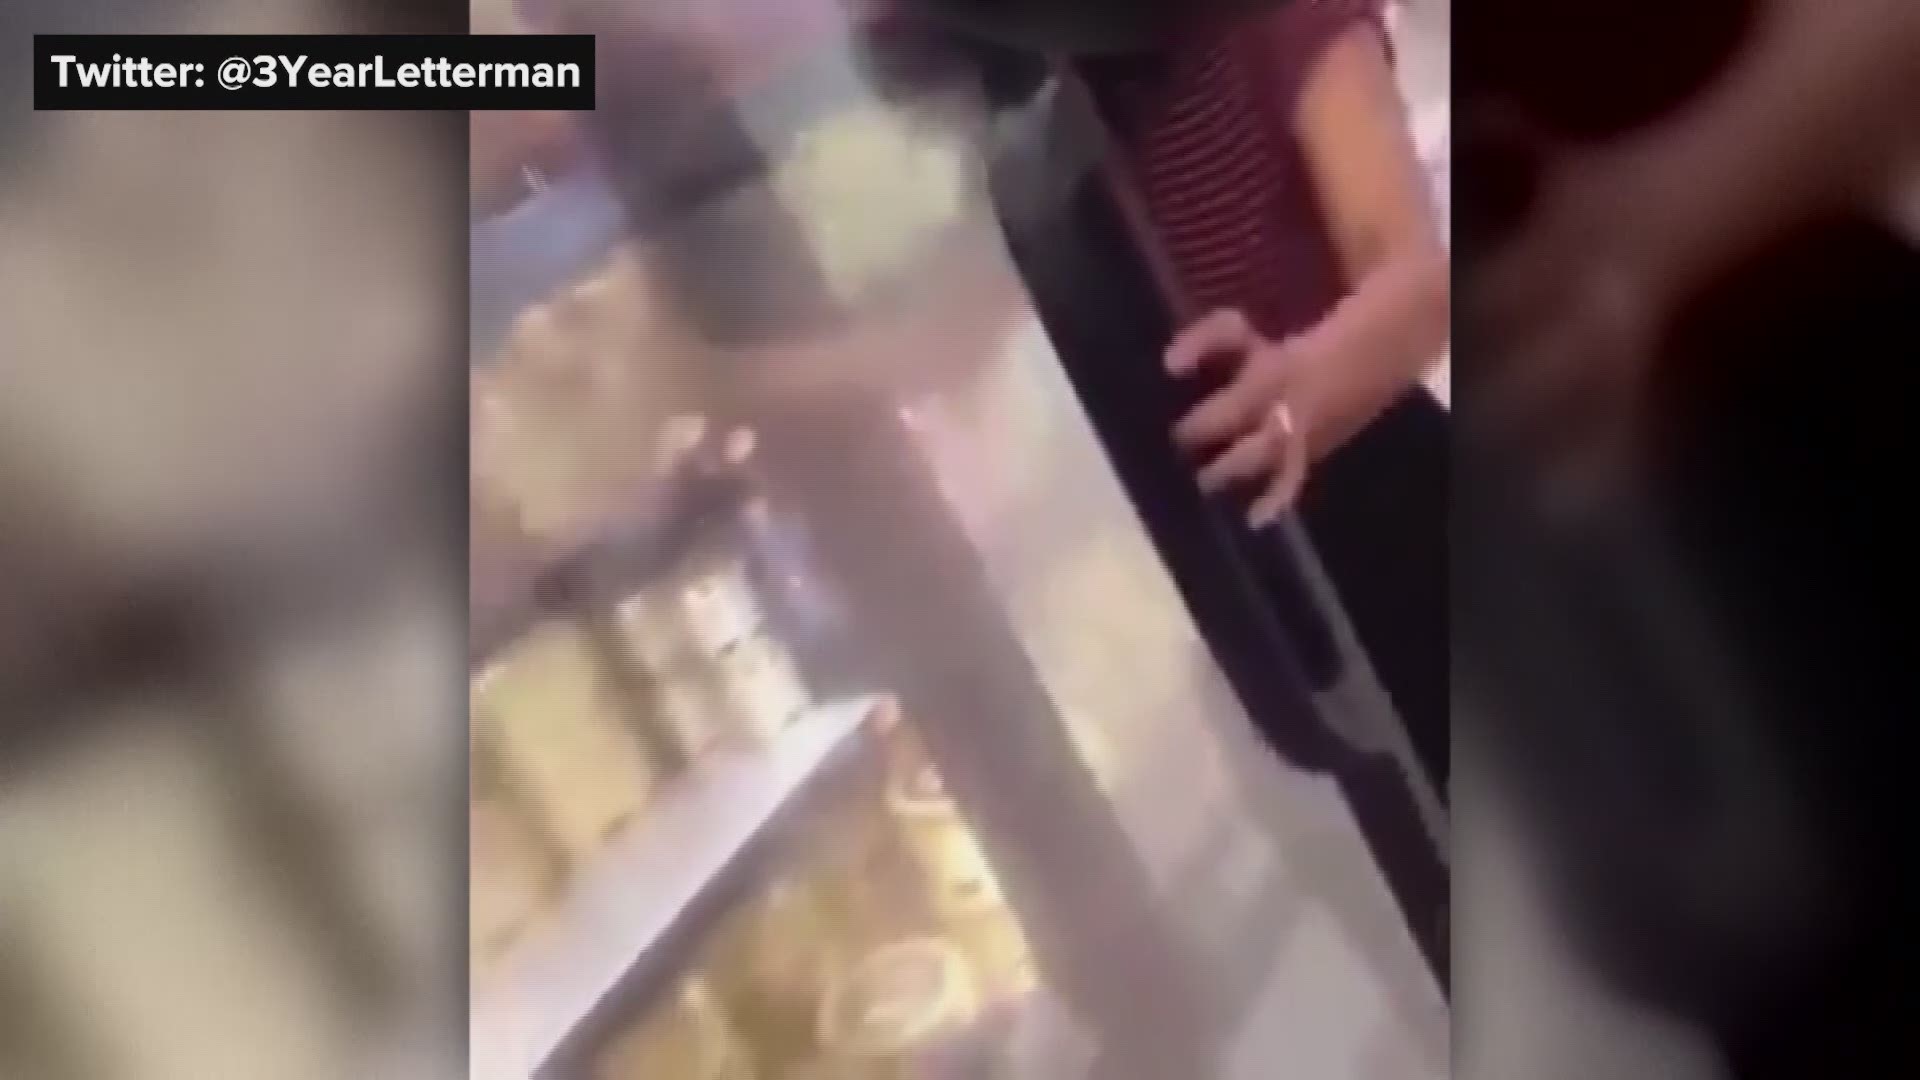 According to the Lufkin Police Department, a minor teenager has been determined as the suspect in the viral video seen licking a gallon of ice cream before returning it to the shelves.